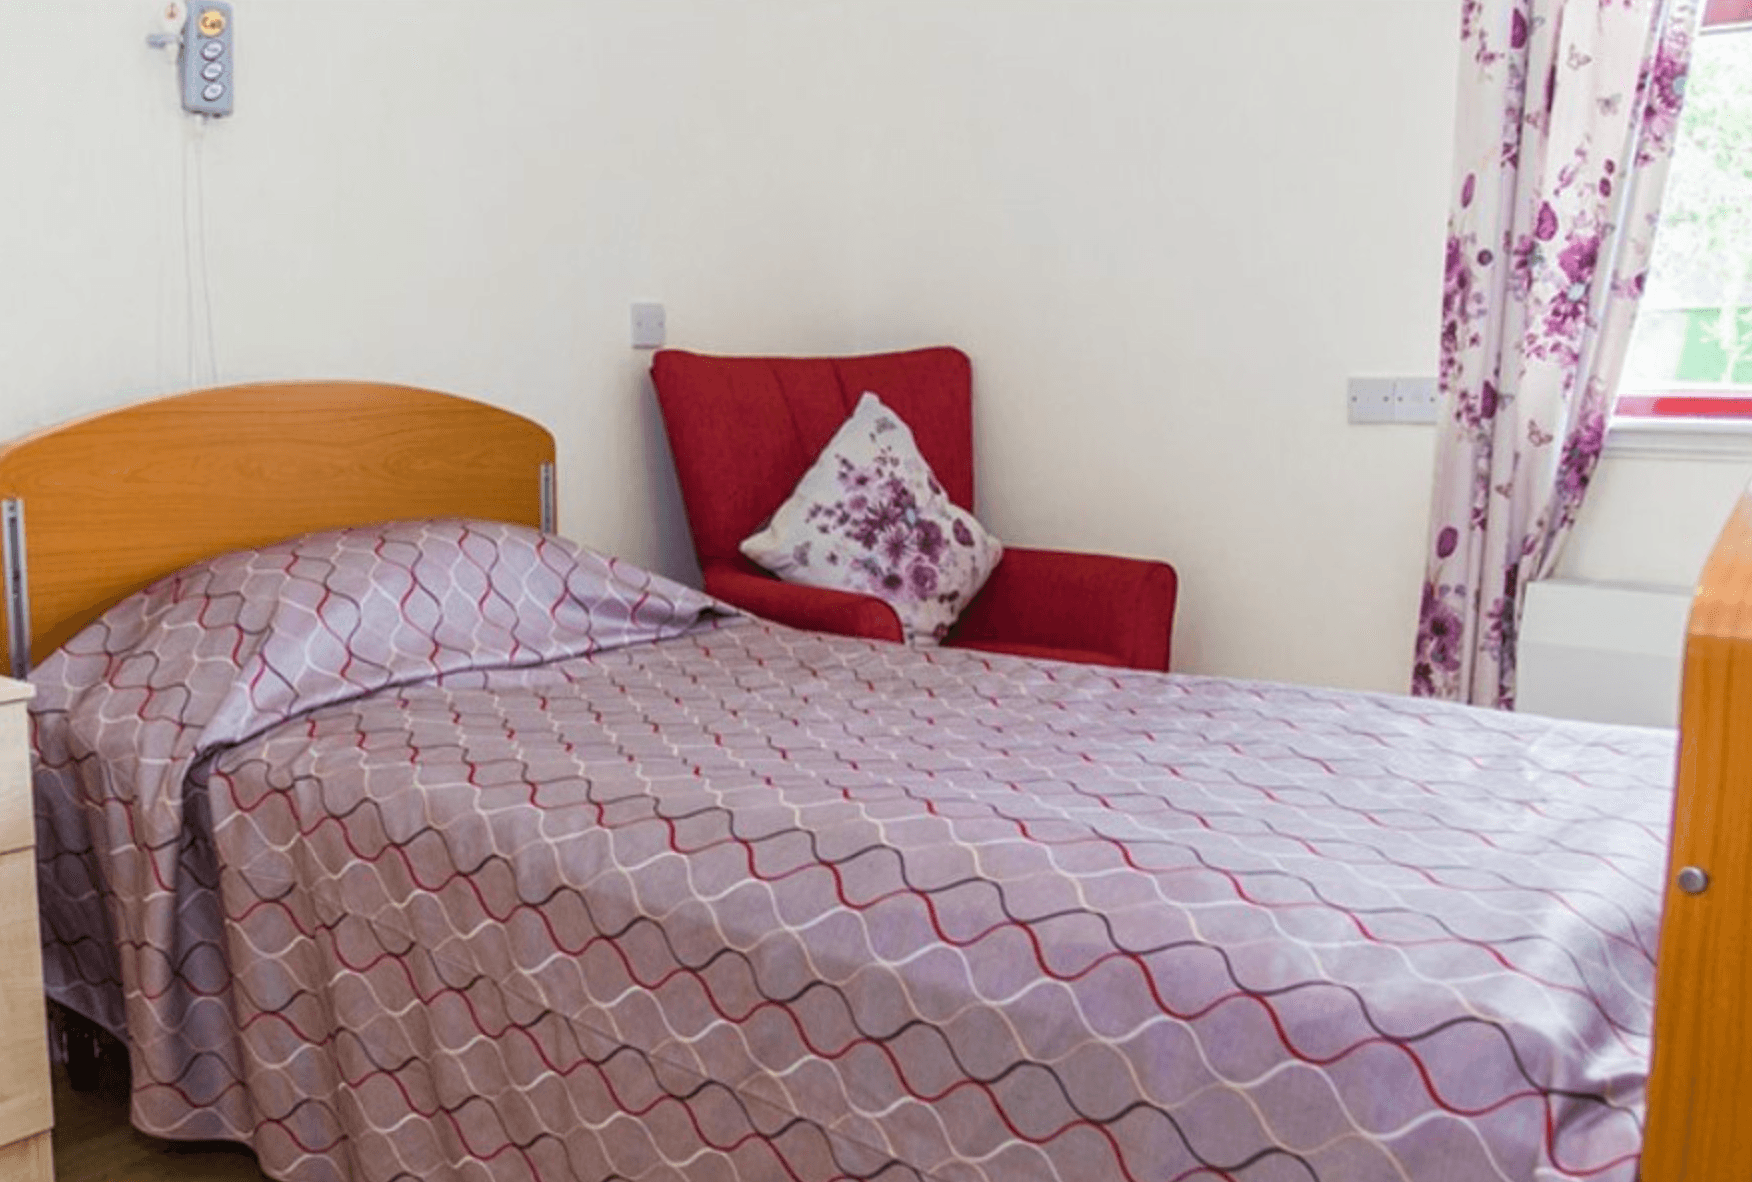 BEdroom of Annan Court Care Home in Annan, Scotland